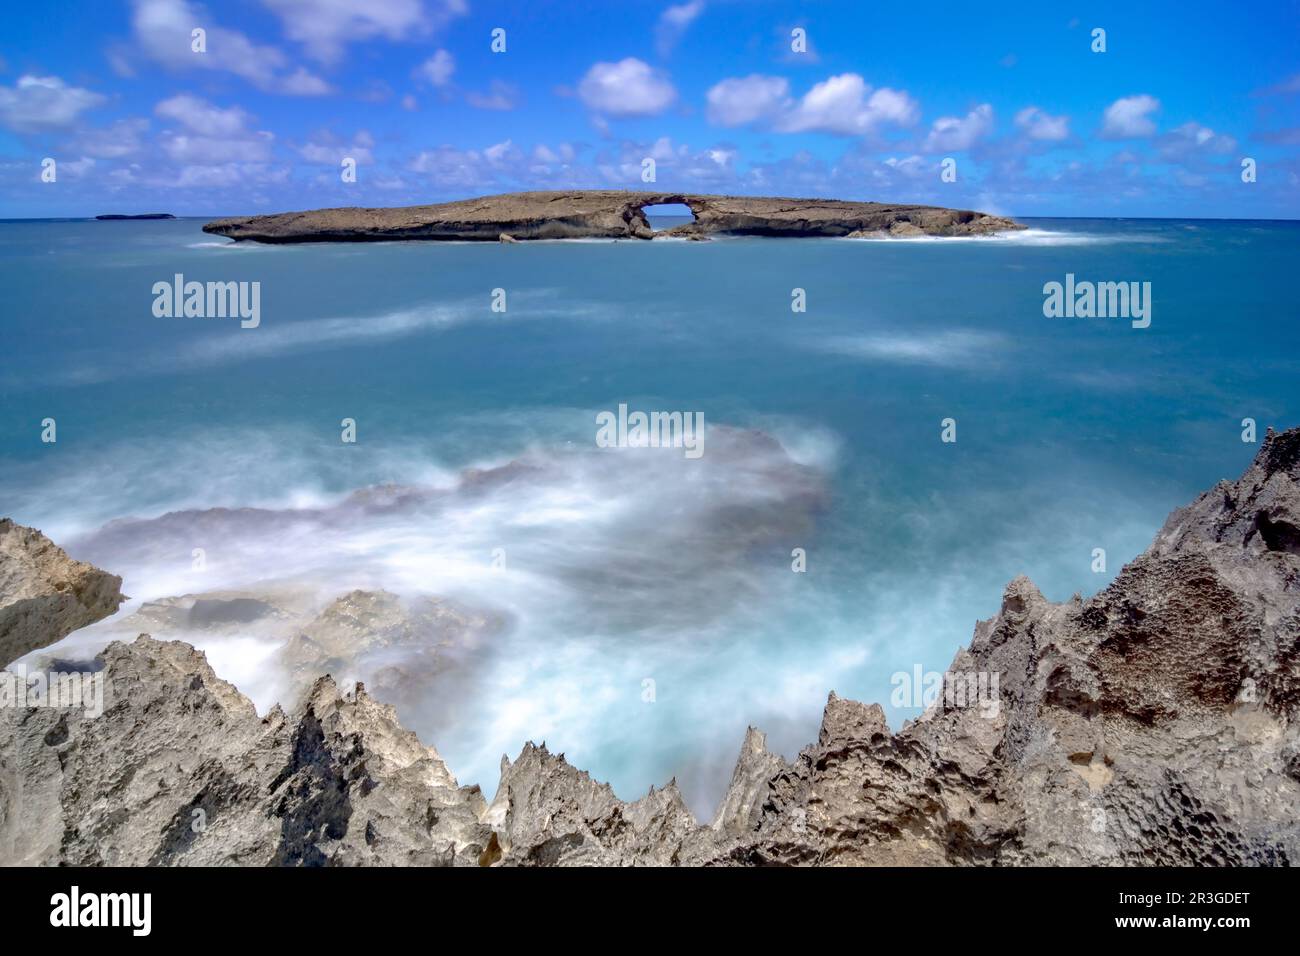 Laie sea arch and rocky cliff beach in oahu hawaii Stock Photo